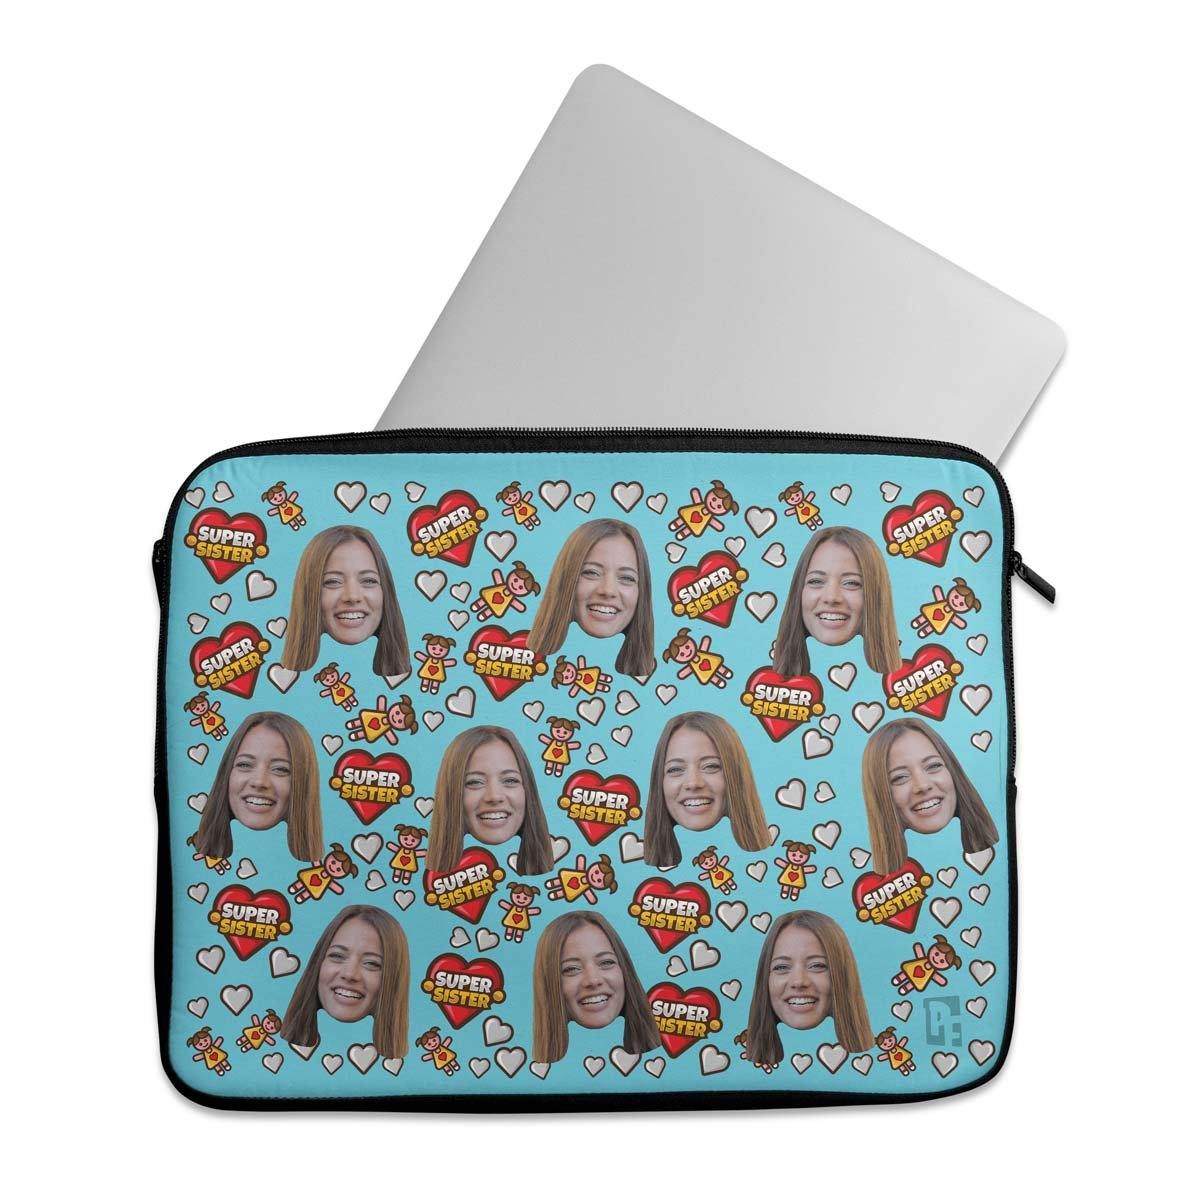 Super Sister Personalized Laptop Sleeve